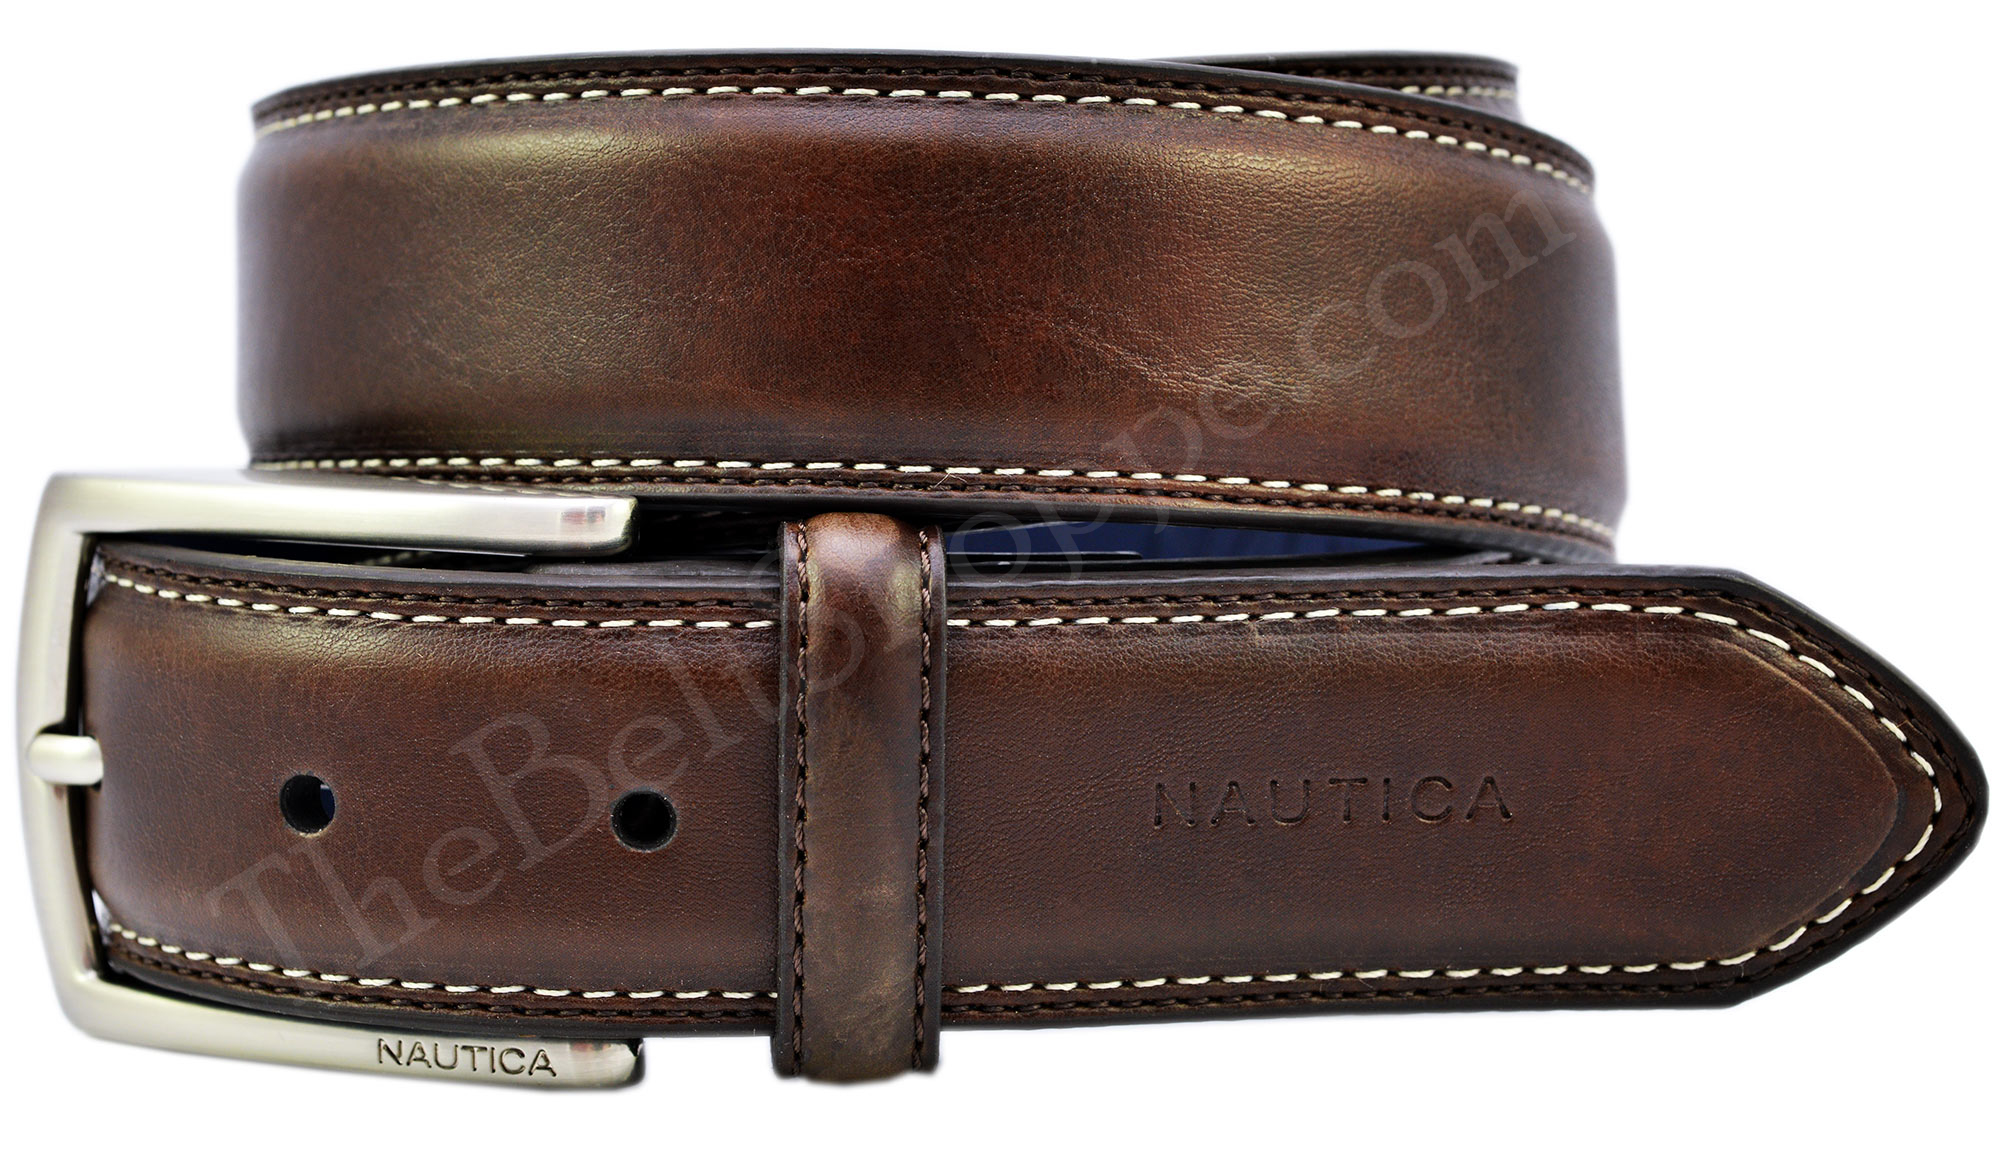 NAUTICA MEN&#39;S DOUBLE STITCHED CASUAL LEATHER BELT - BROWN - 11NU02X030 - NEW | eBay